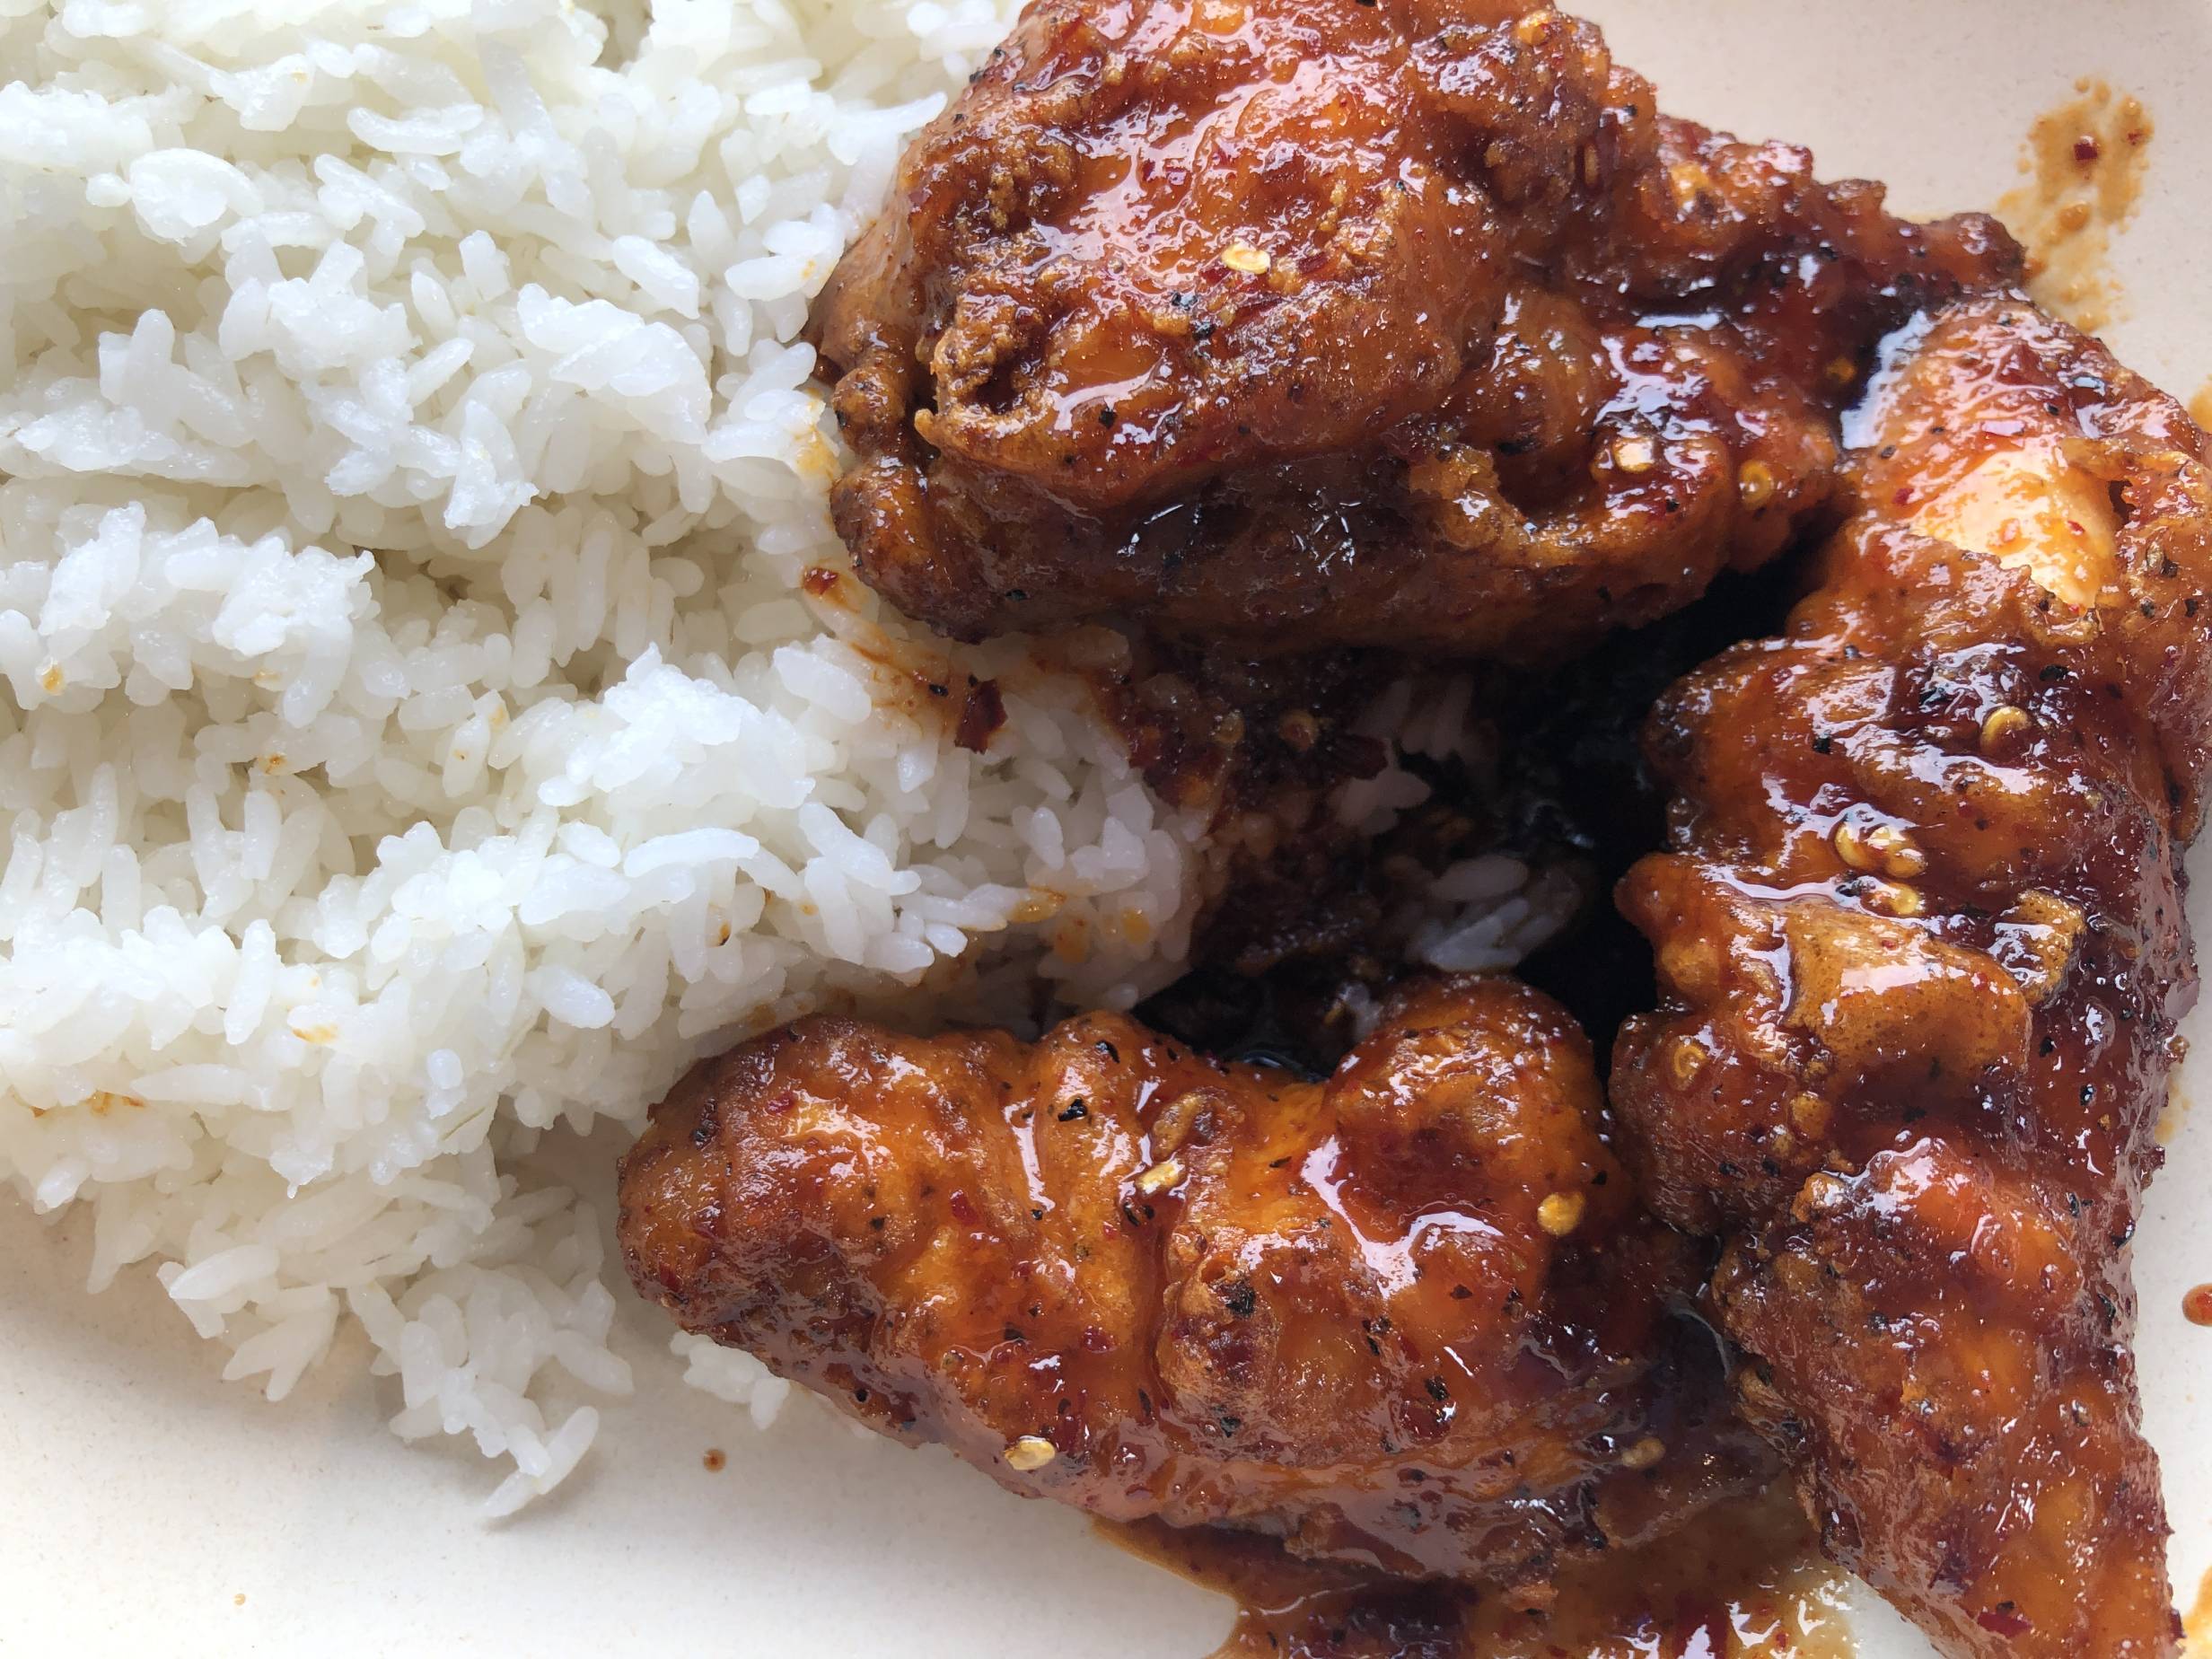 Hurry to KoFusion’s campus location for this spicy Korean chicken